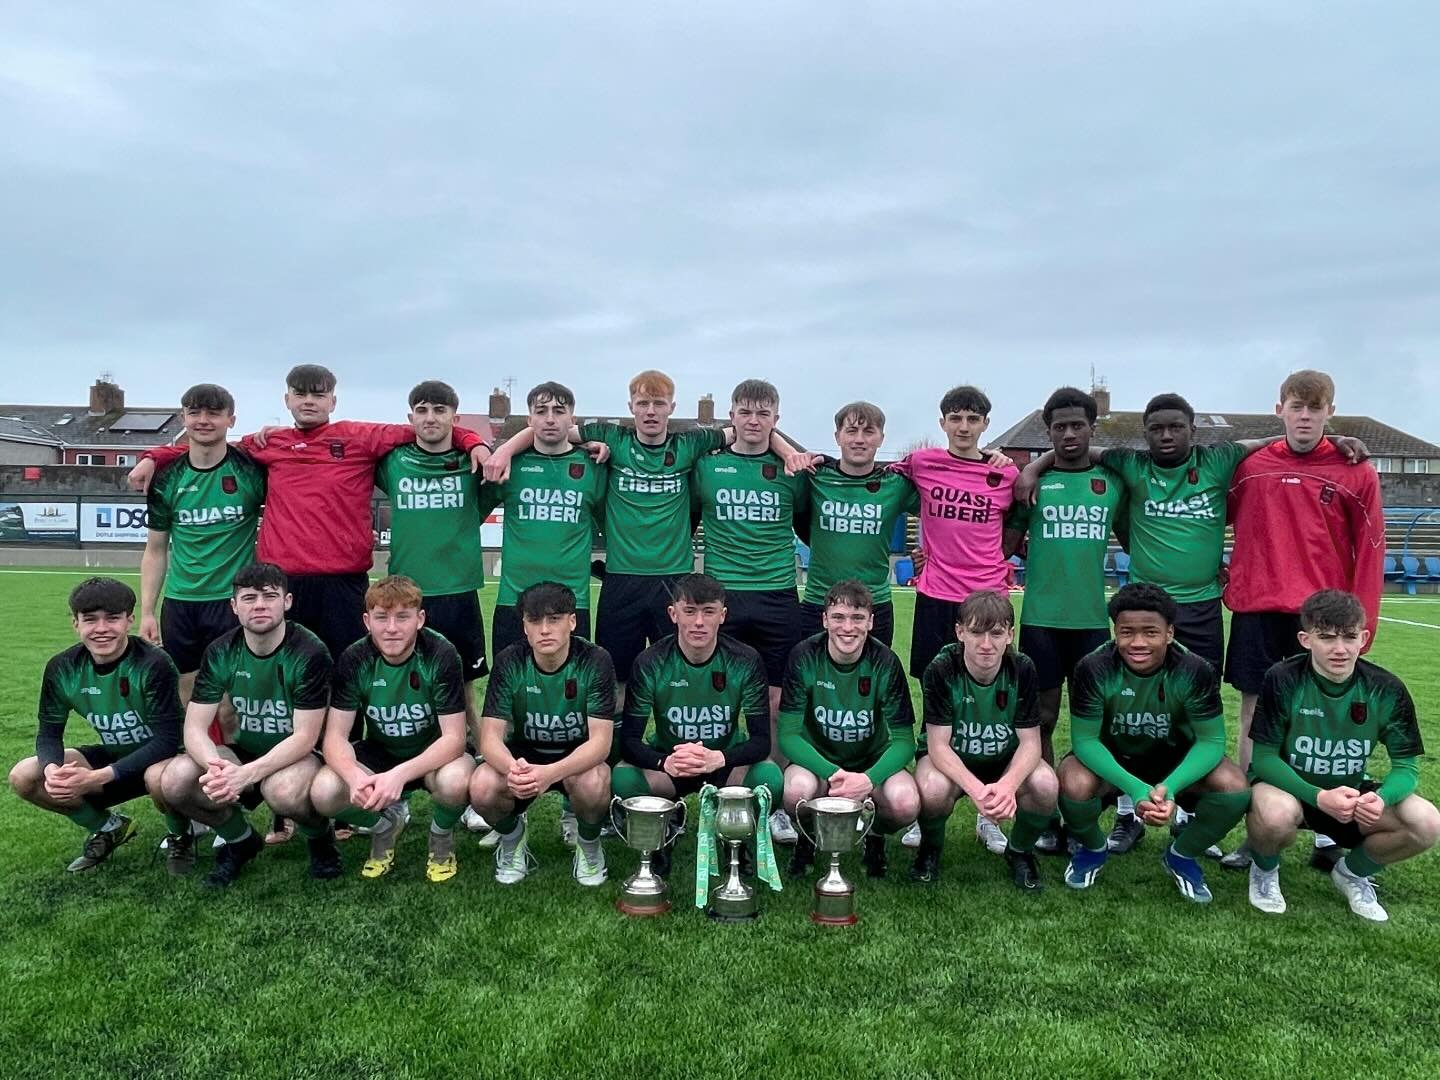 Congratulations once again to our U19 Boys Soccer Team and Coach Mr. O&rsquo;Keeffe on their fantastic 2-1 win yesterday in the Cork School&rsquo;s Cup Final against Midleton CBS 👏🔴⚫️ To be Champions of Cork, Munster and Ireland is a historic feat 